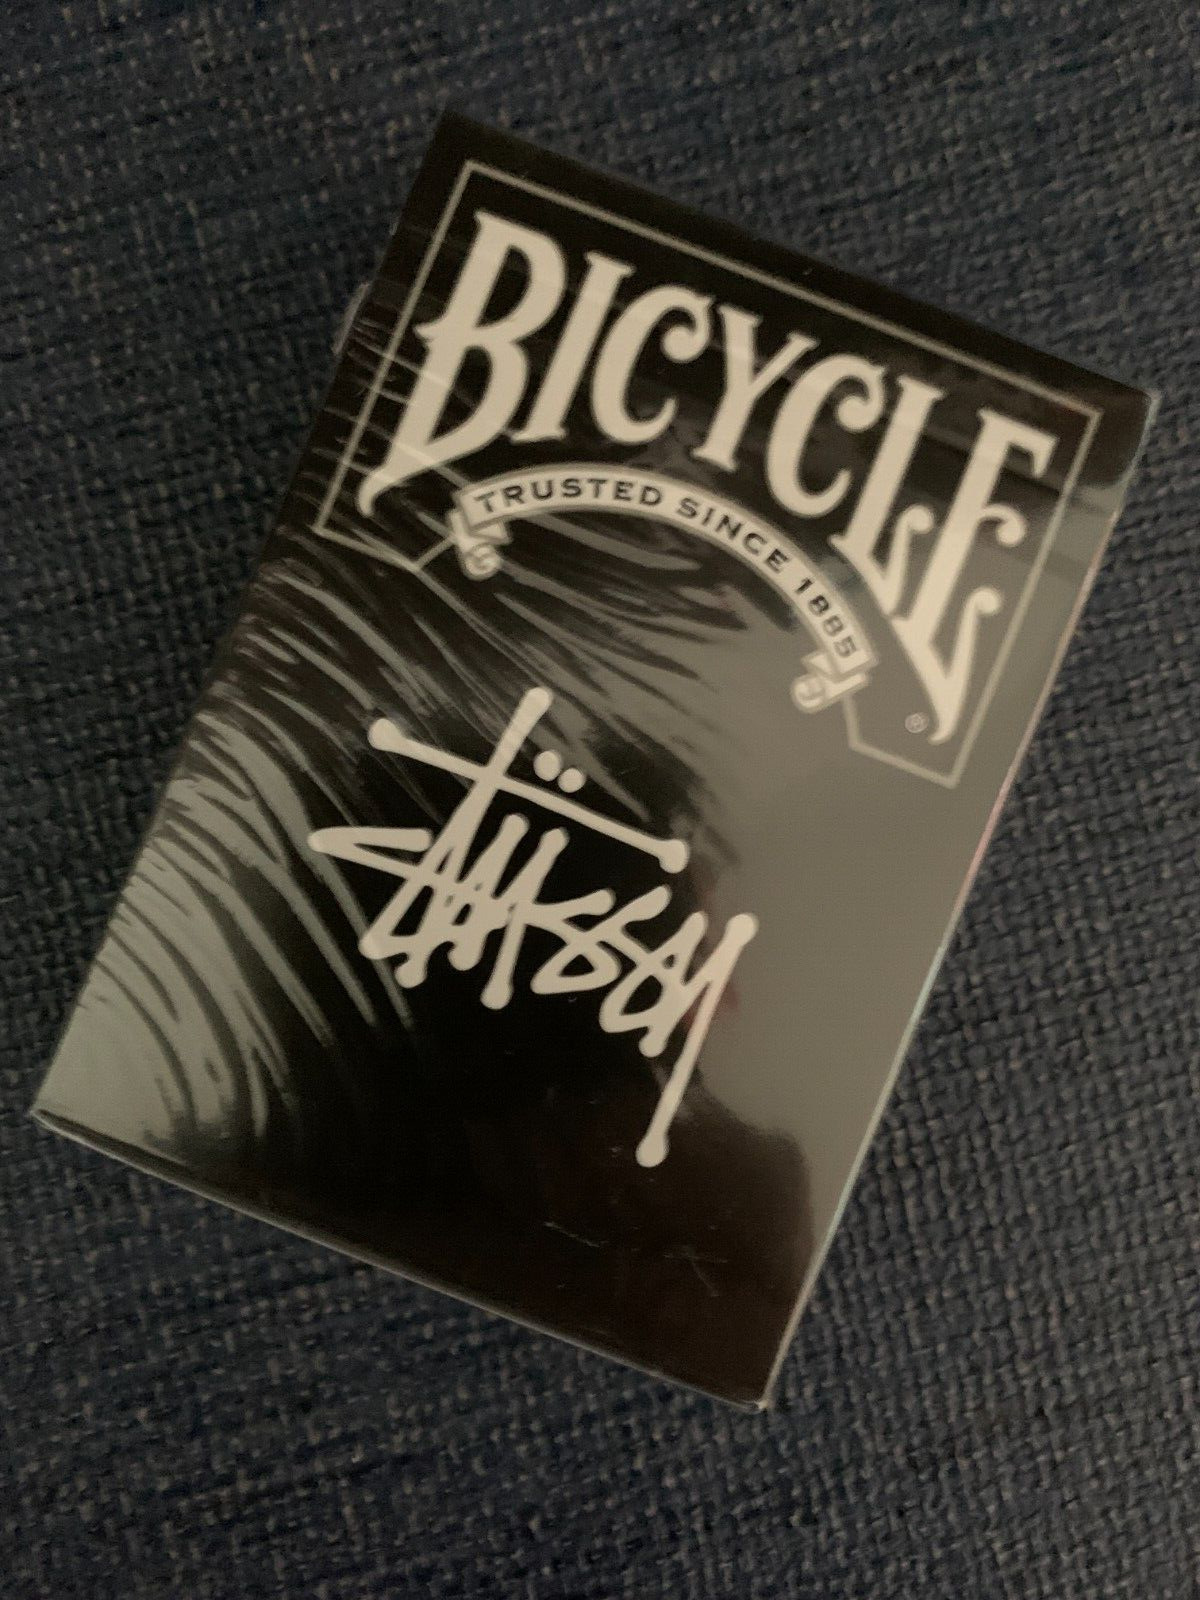 STUSSY  Bicycle Deck of cards Sealed   Brand New